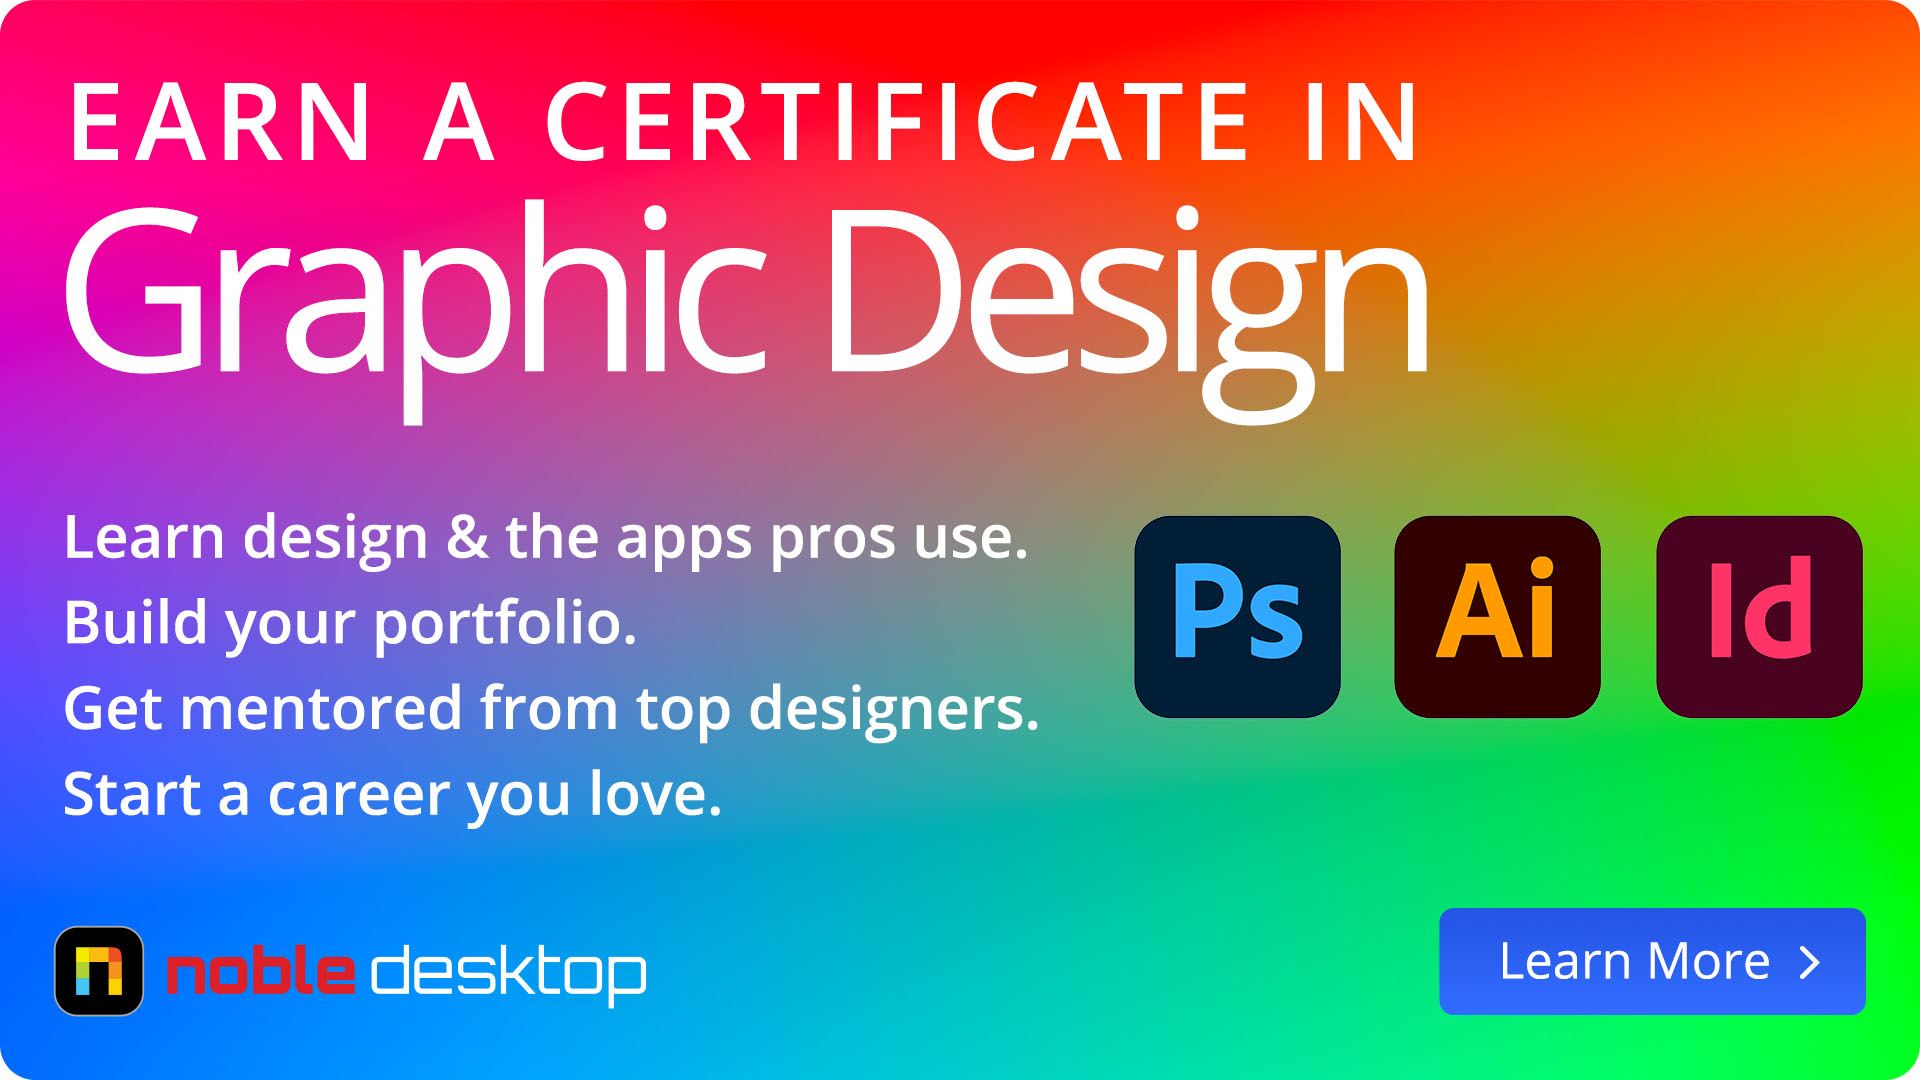 Each a certificate in graphic design from Noble Desktop